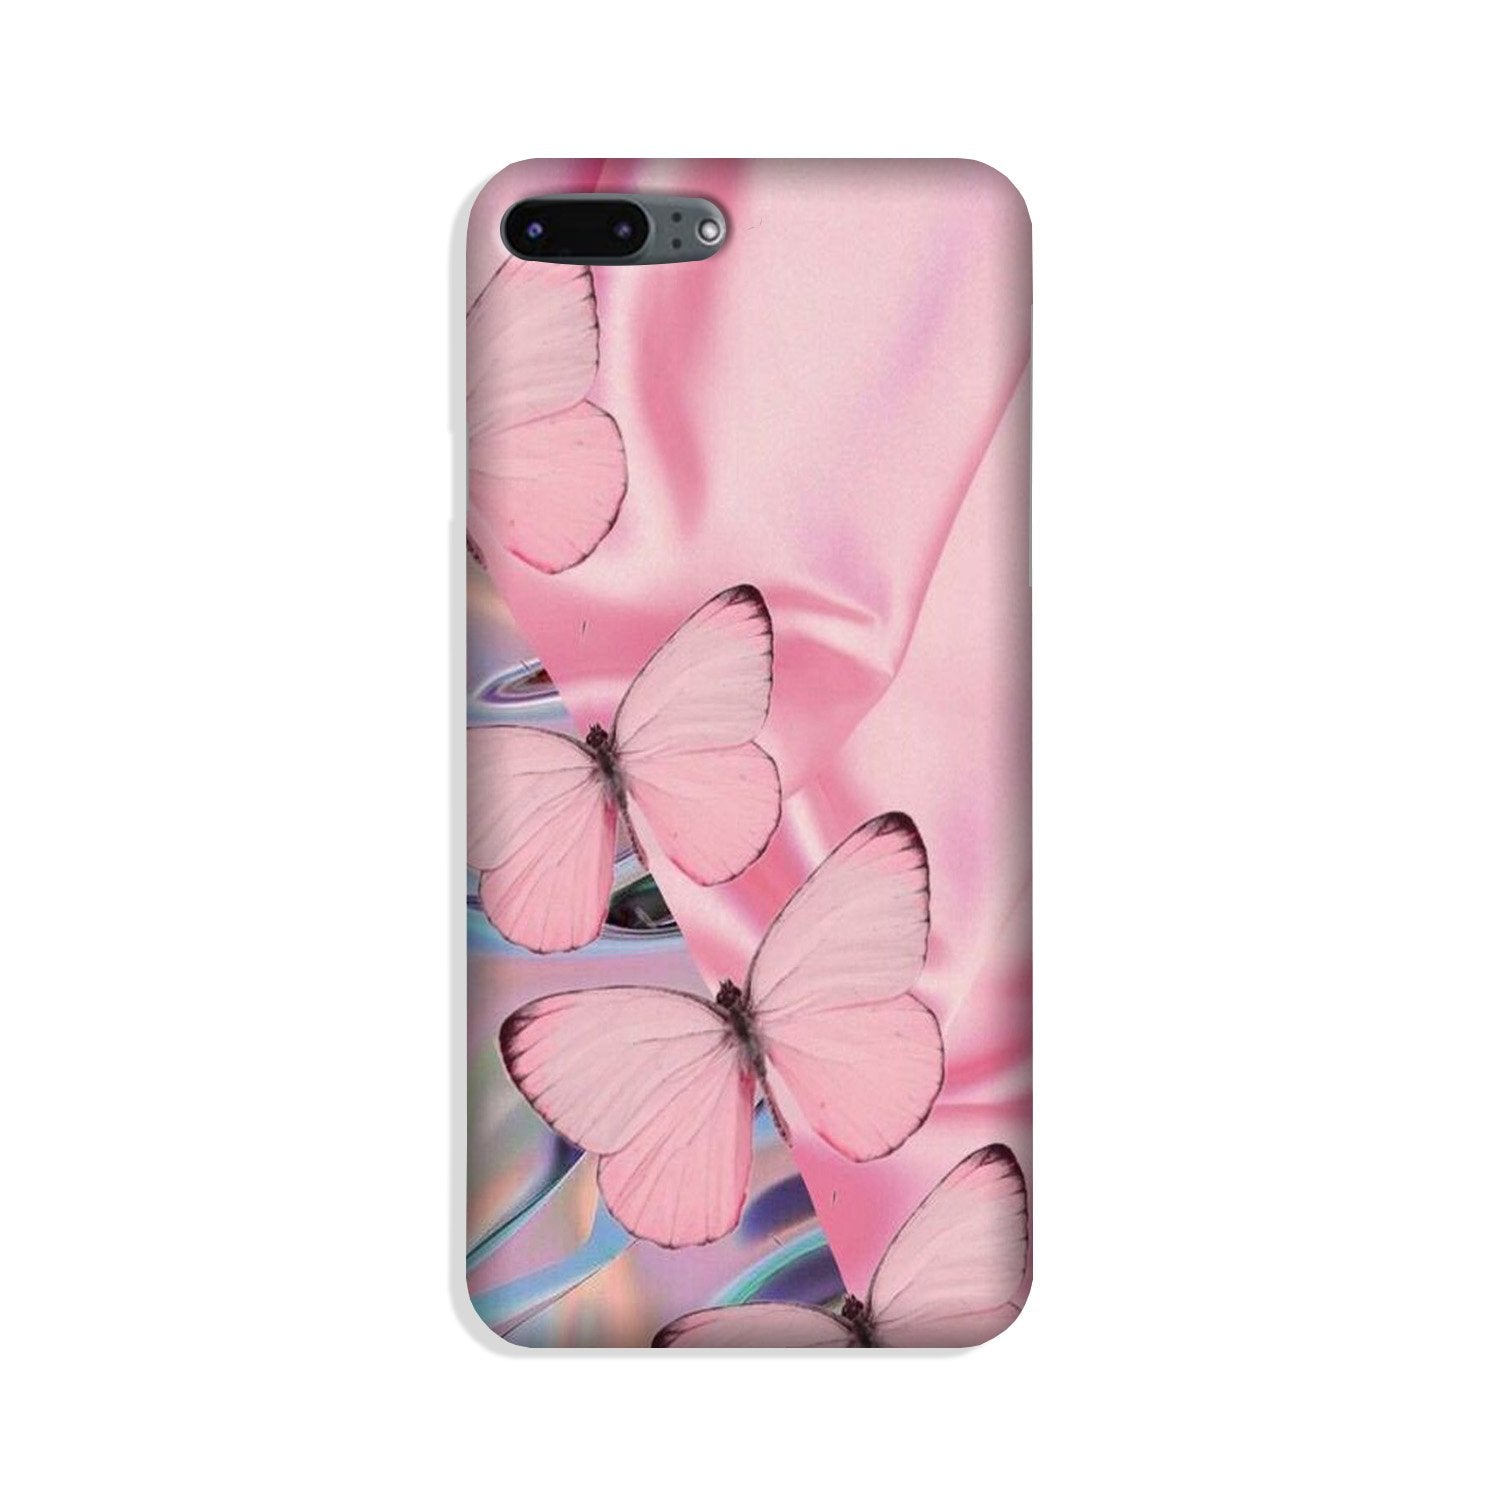 Butterflies Case for iPhone 8 Plus